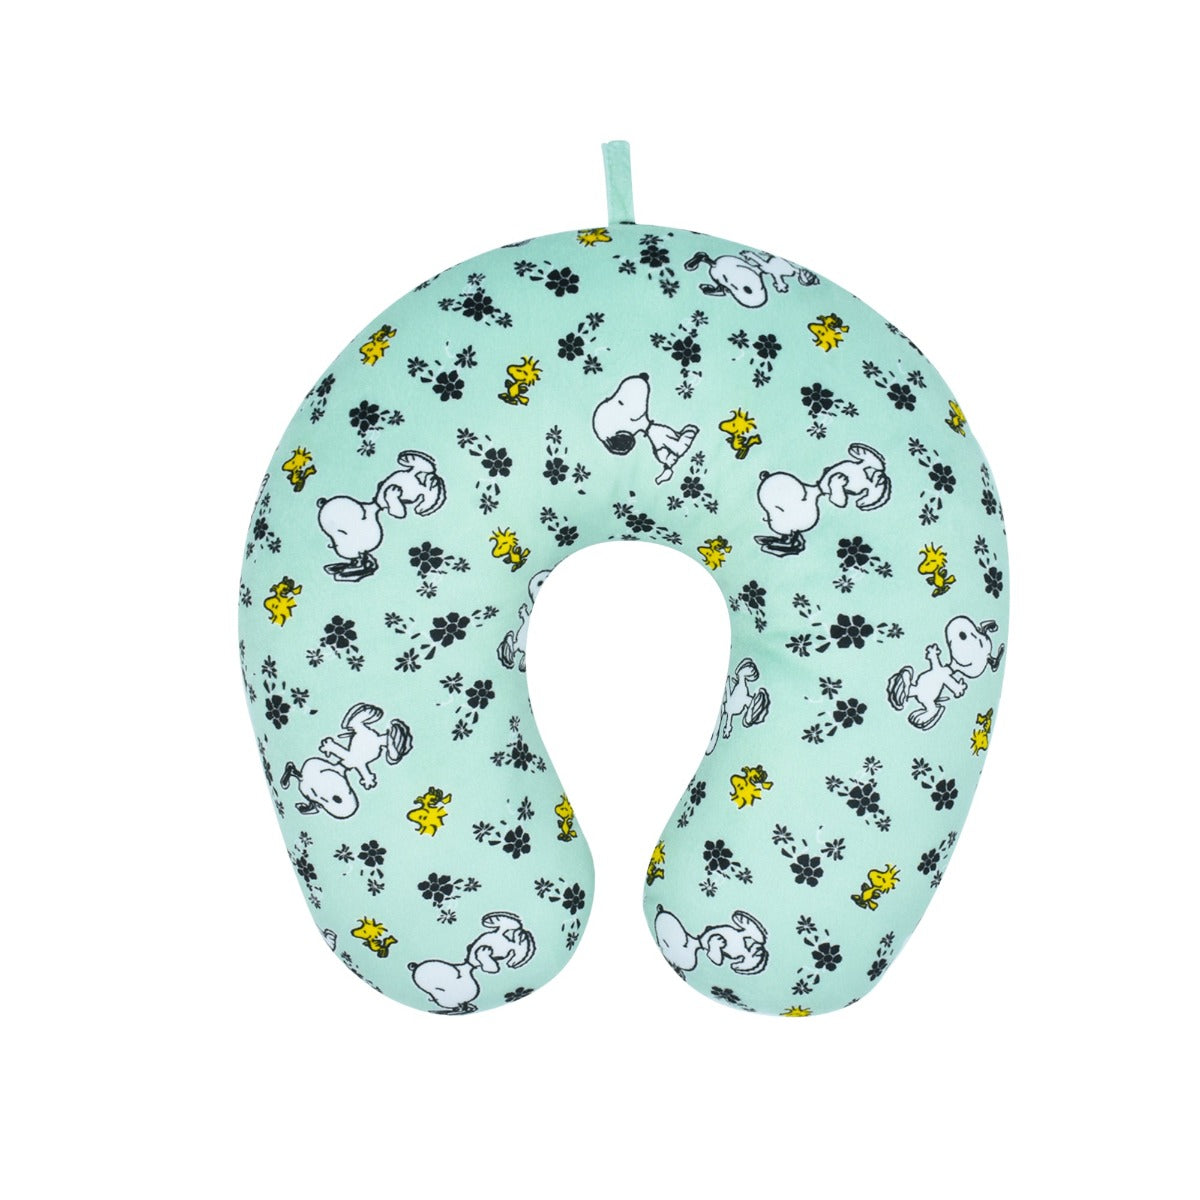 Ful peanuts snoopy woodstock flowers travel neck pillow mint green - best neckpillows for travel